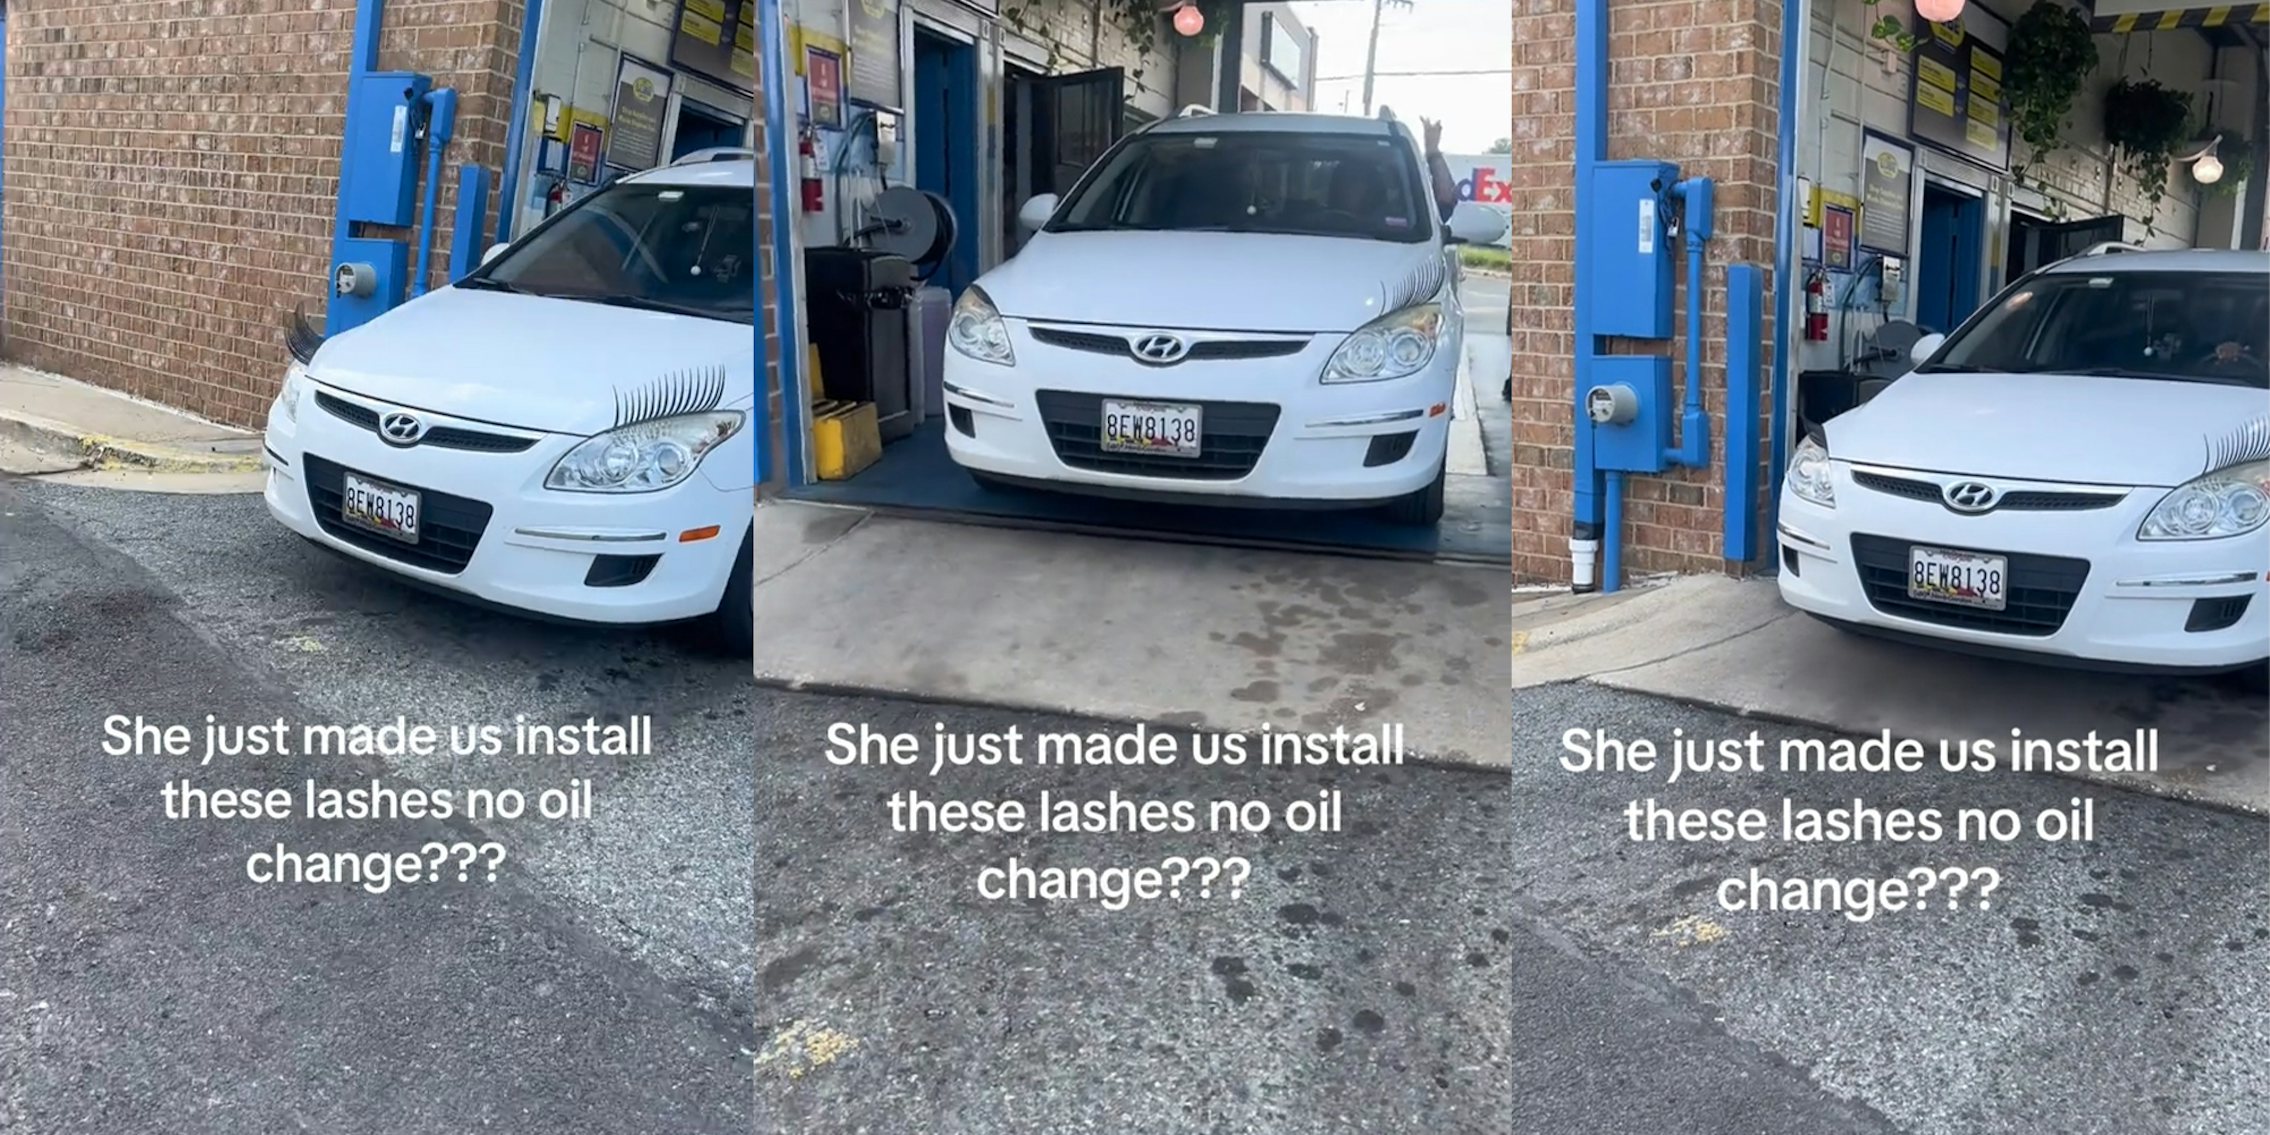 Woman goes in for oil change but she just wants them to put on lashes